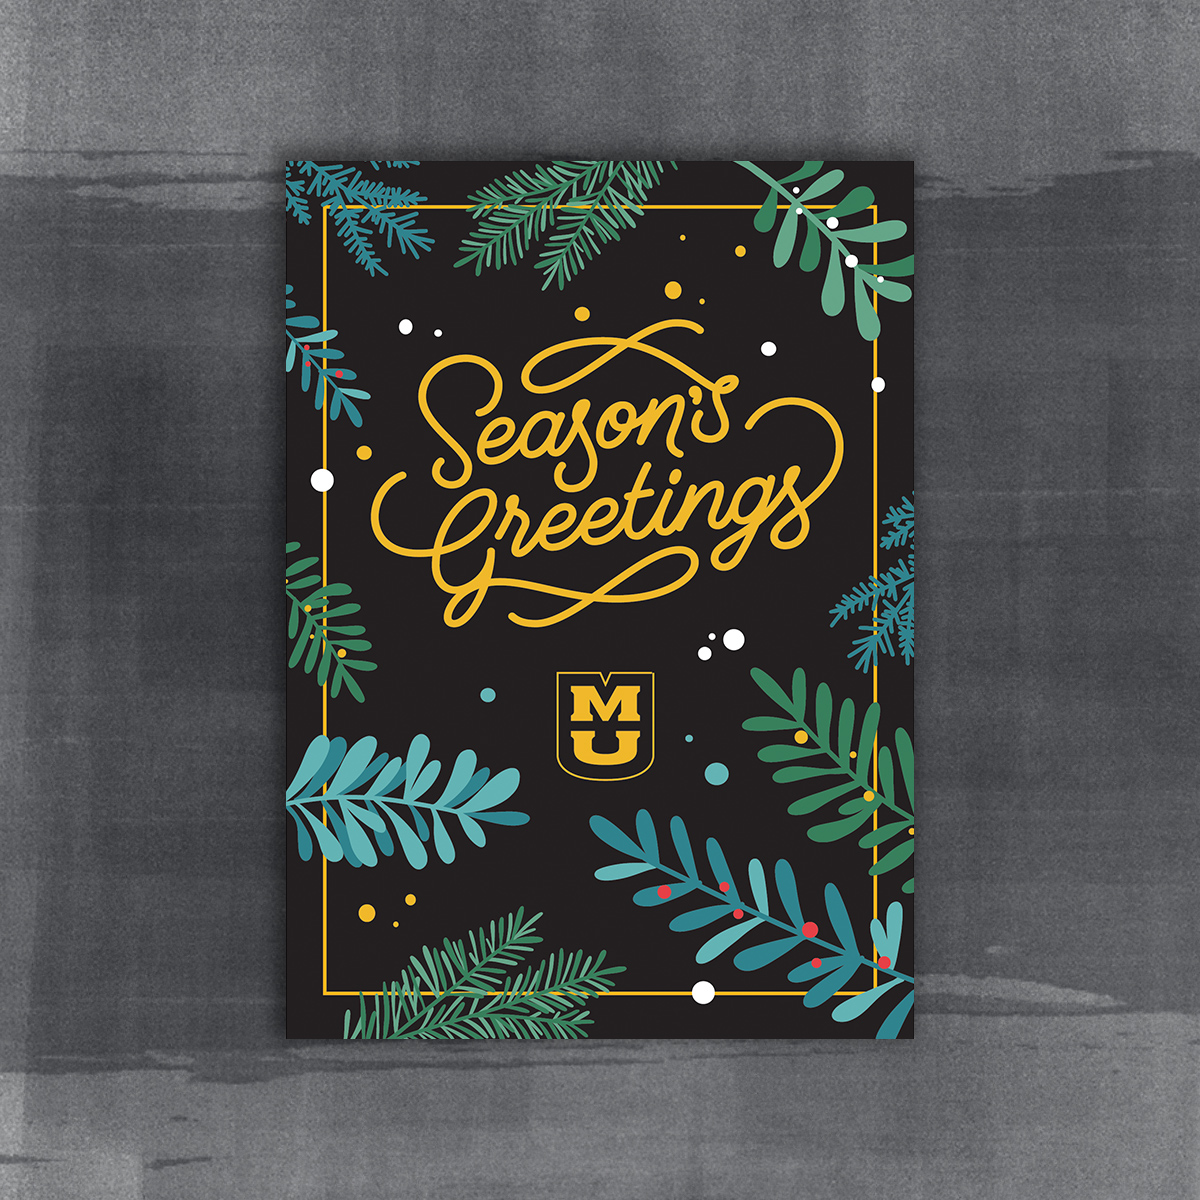 Seasons greetings card with winter foliage and stacked MU